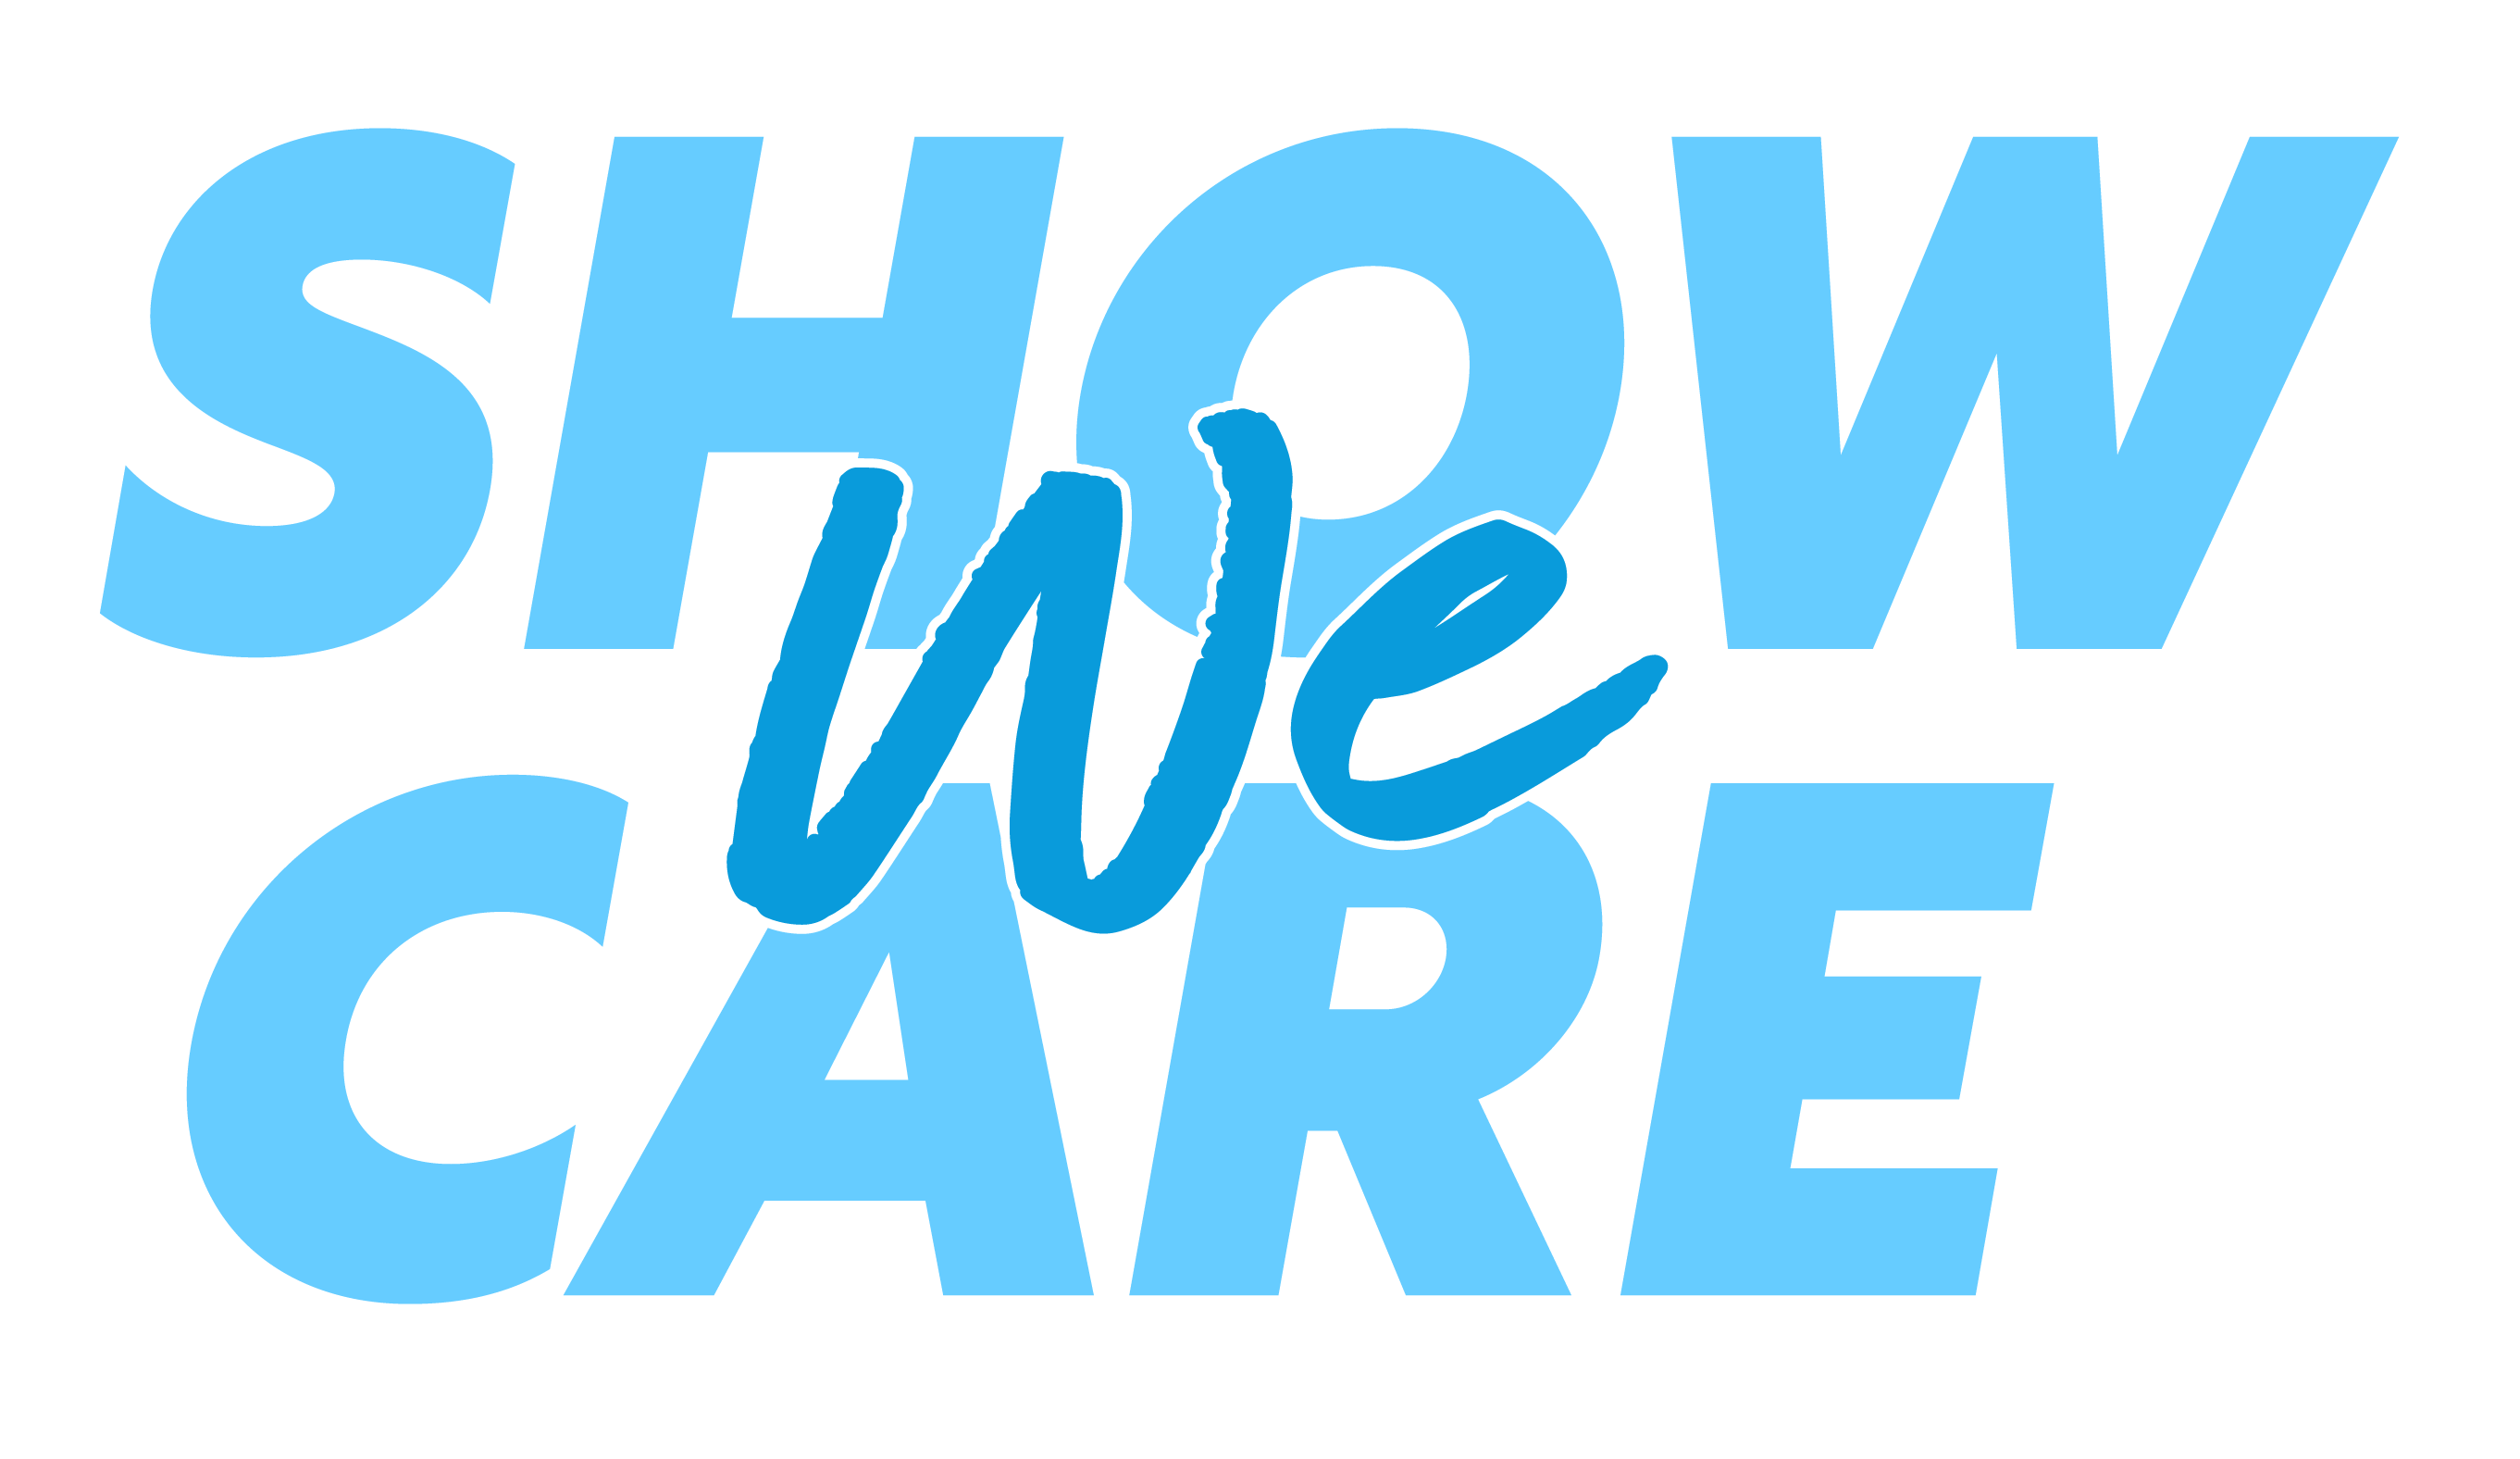 Let’s take care for all! Logo